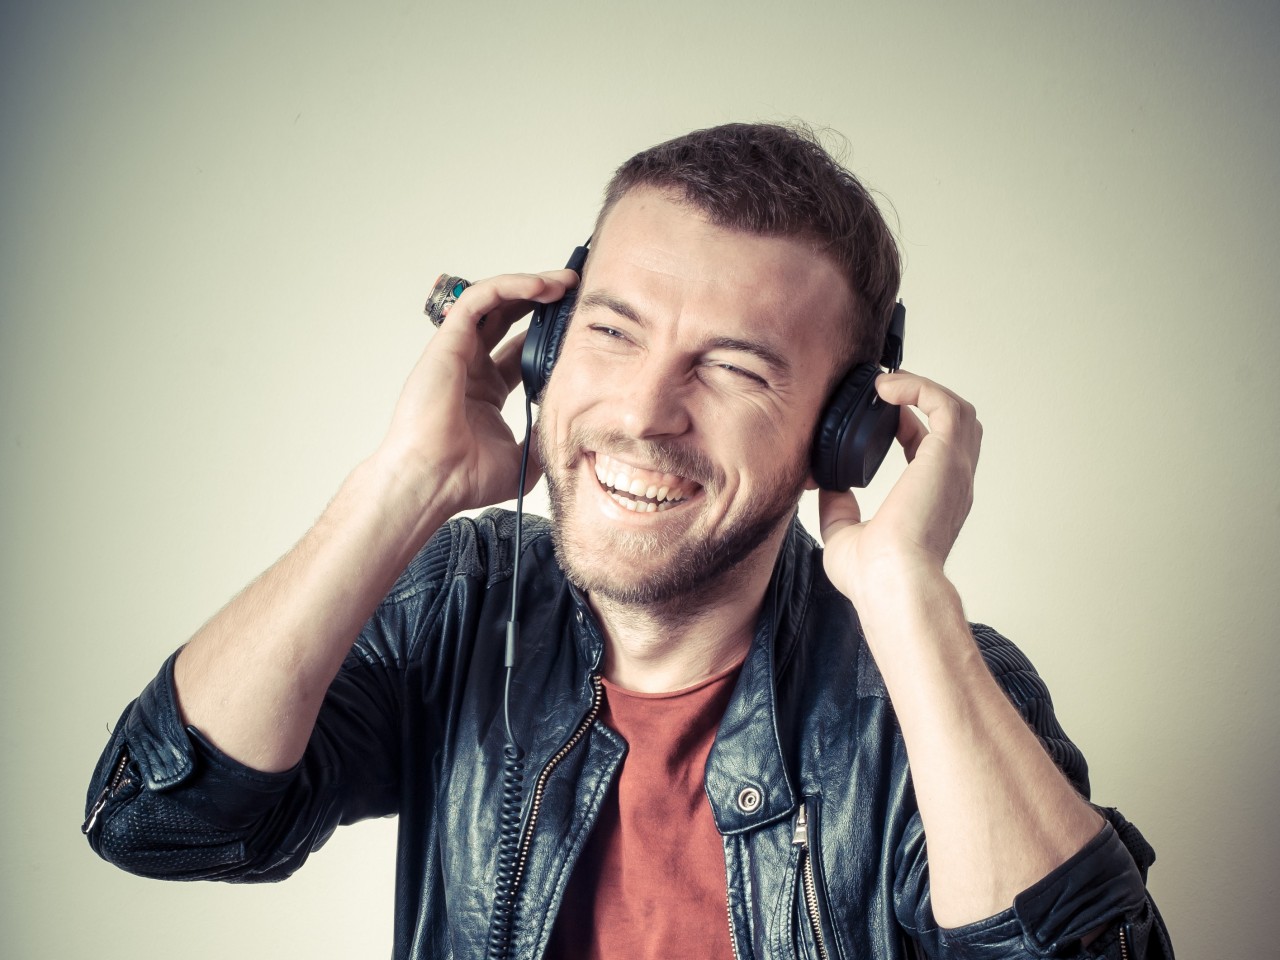 Can You Beat Your BFF in This General Knowledge Quiz? person listening to music1